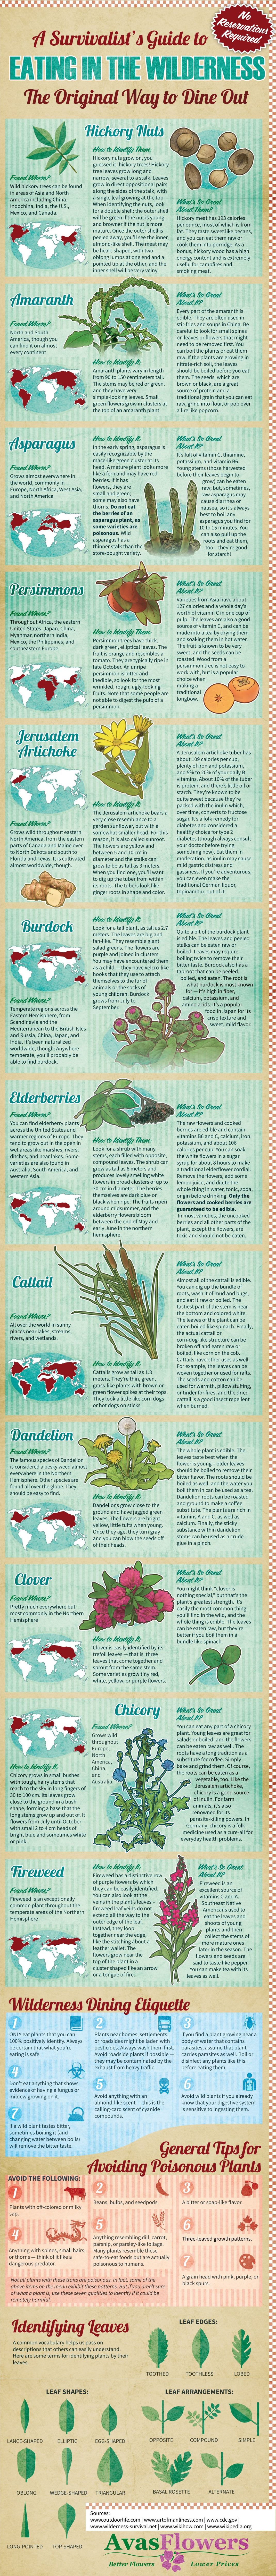 A Survivalist's Guide to Eating in the Wilderness - Avasflowers.net - Infographic